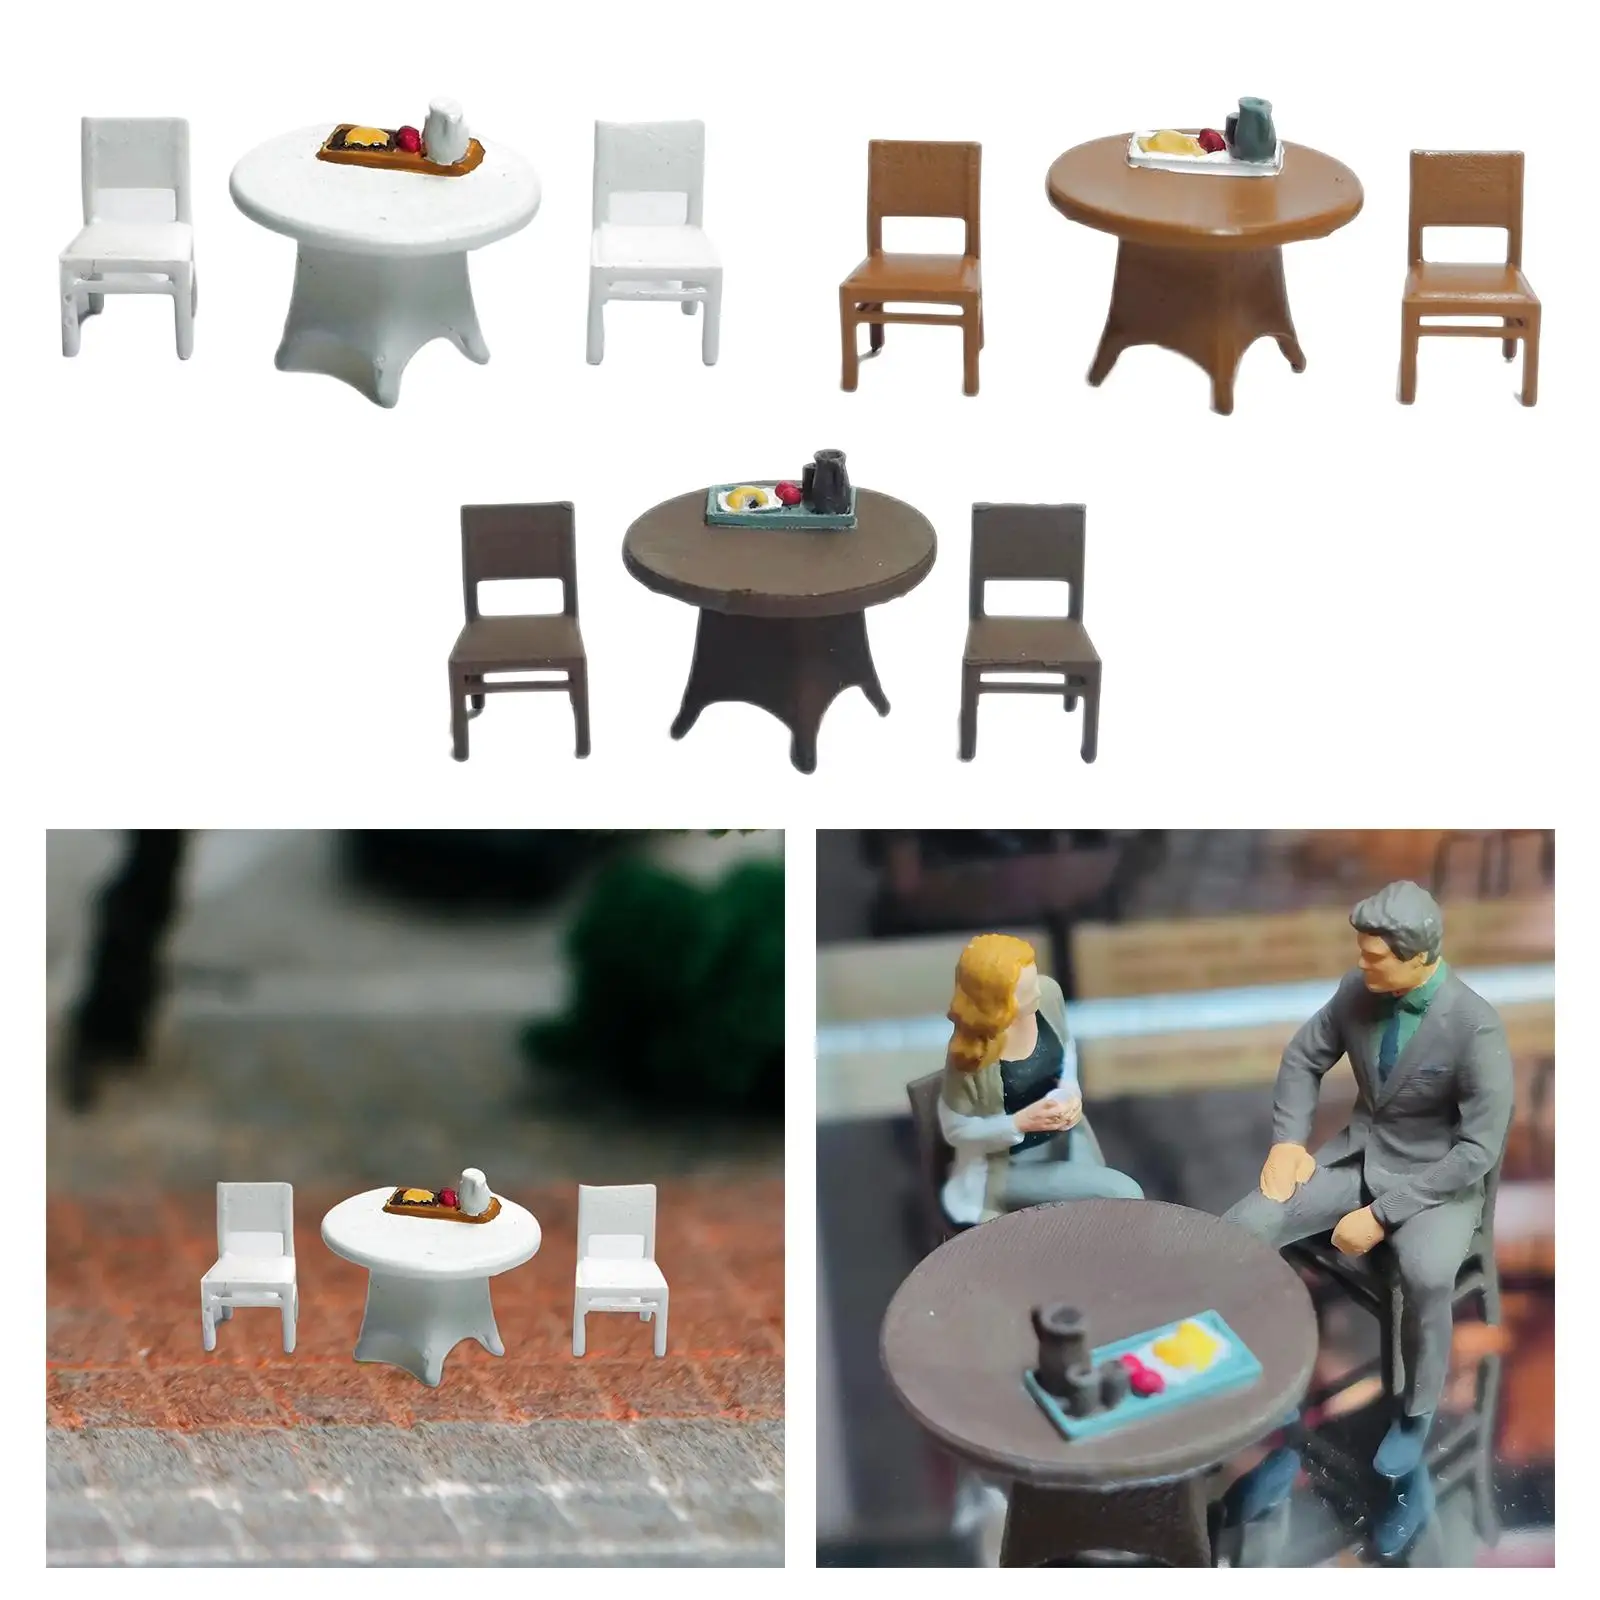 3Pcs 1/64 Table and Chair Model Fairy Garden DIY Projects S Scale Trains Architectural Layout Dioramas Miniature Scenes Decor